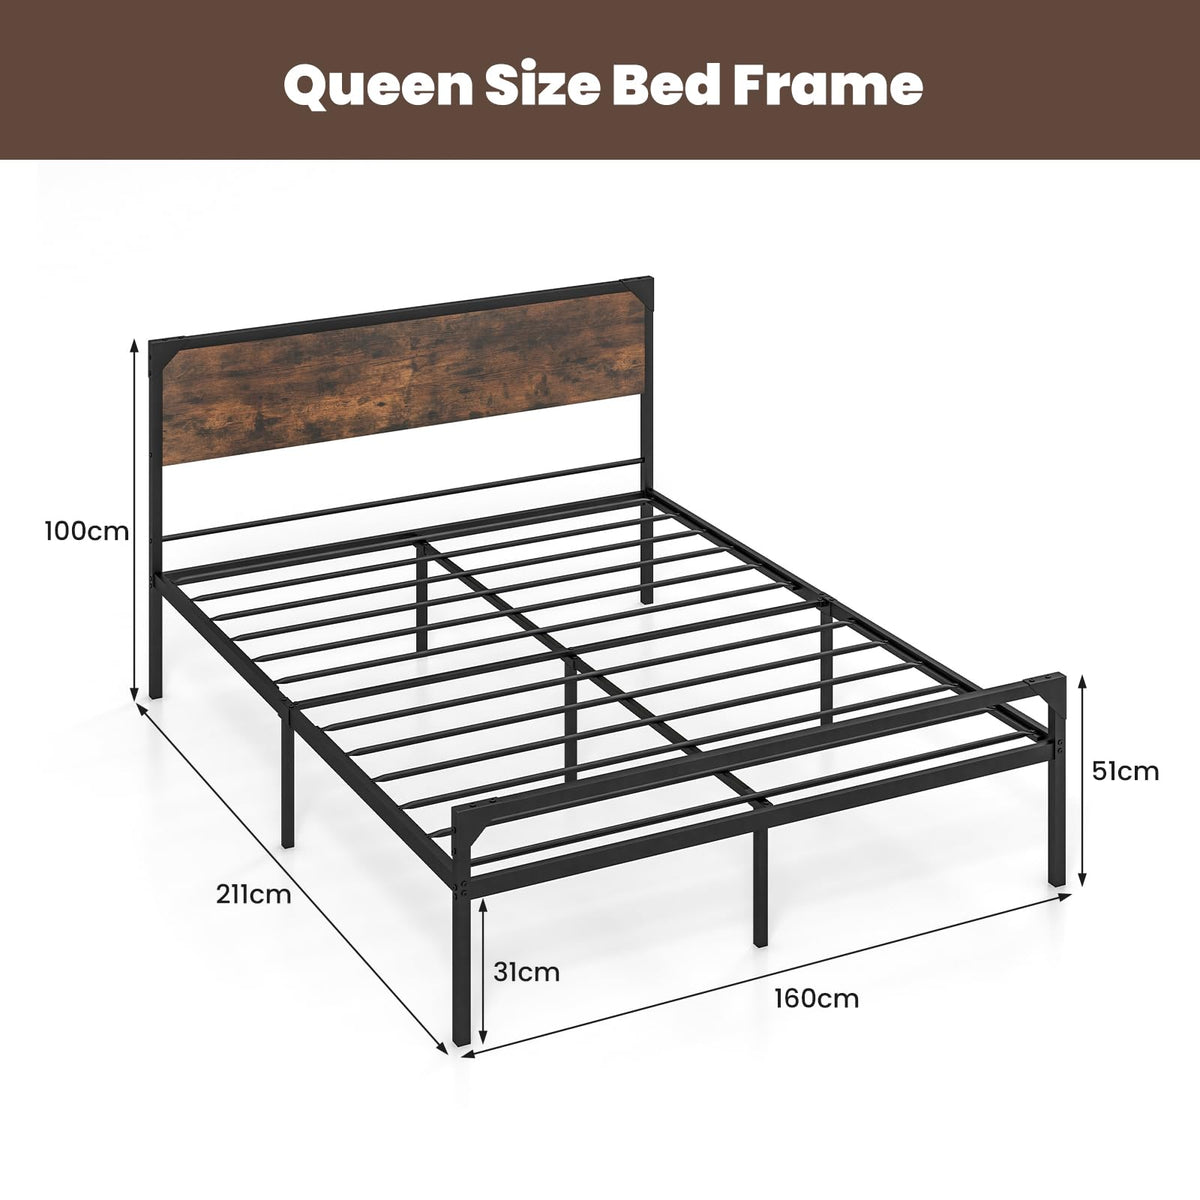 Giantex Industrial Full/Queen Size Bed Frame, Metal Platform Bed with 9 Support Legs